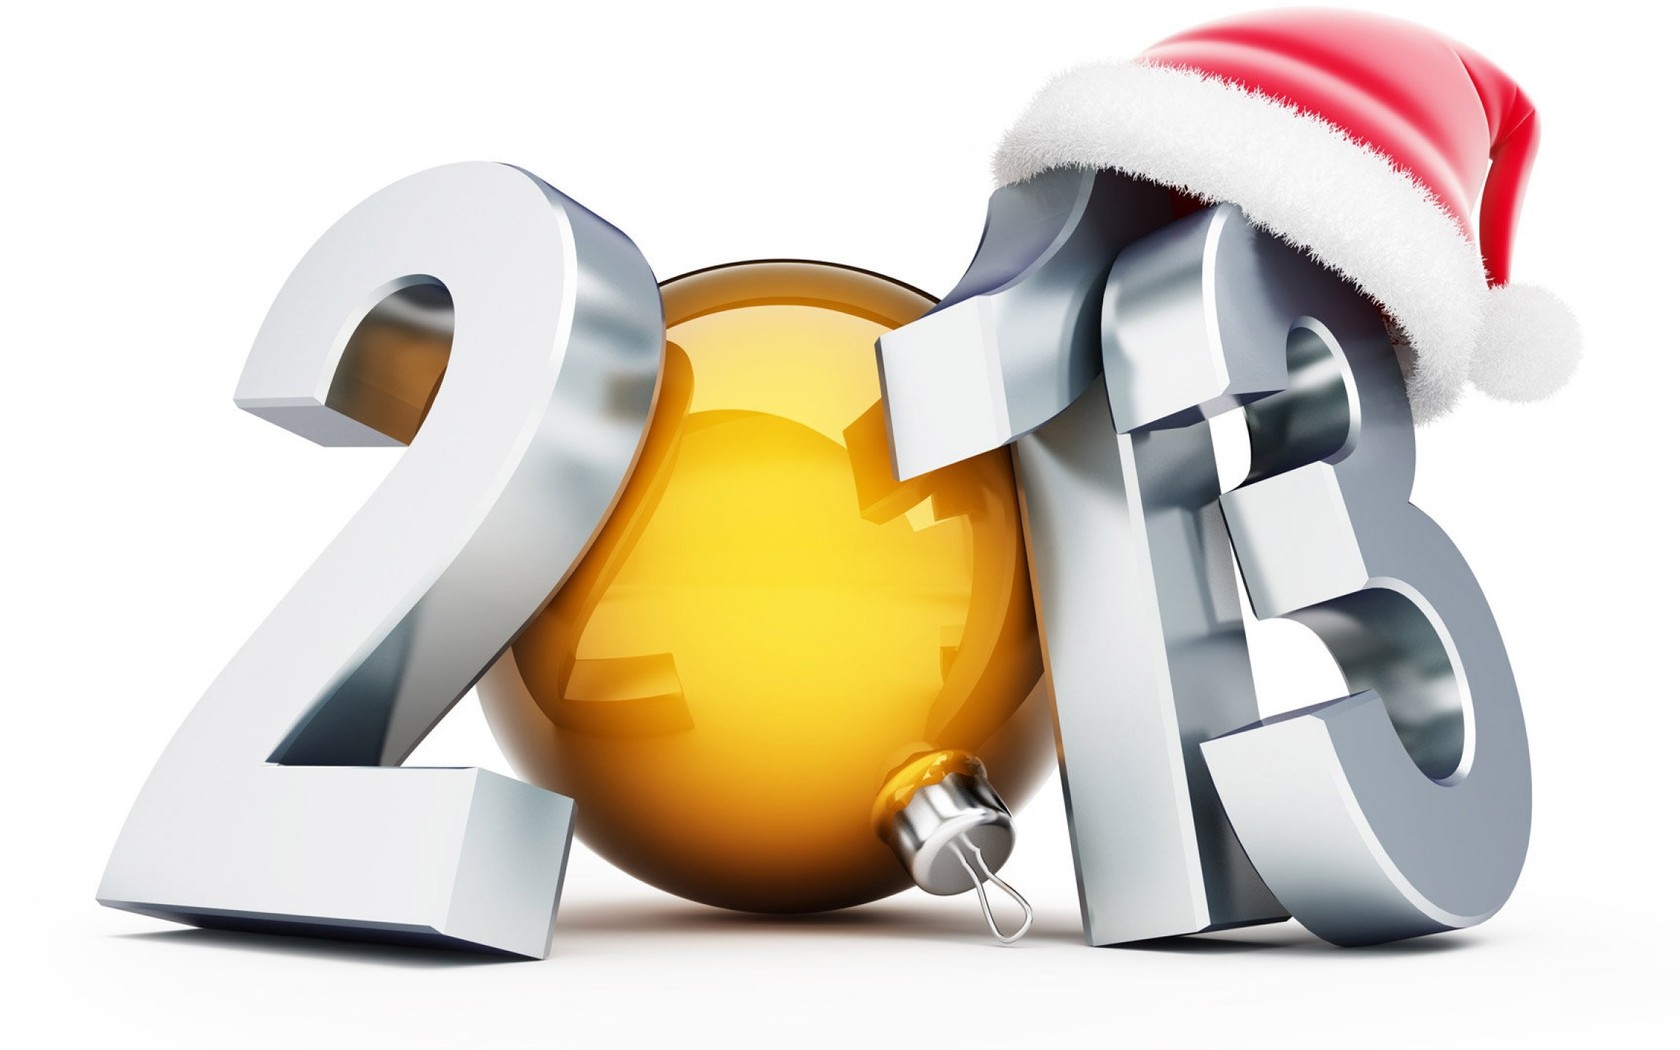 New Year 2013 Fresh HD Wallpapers 